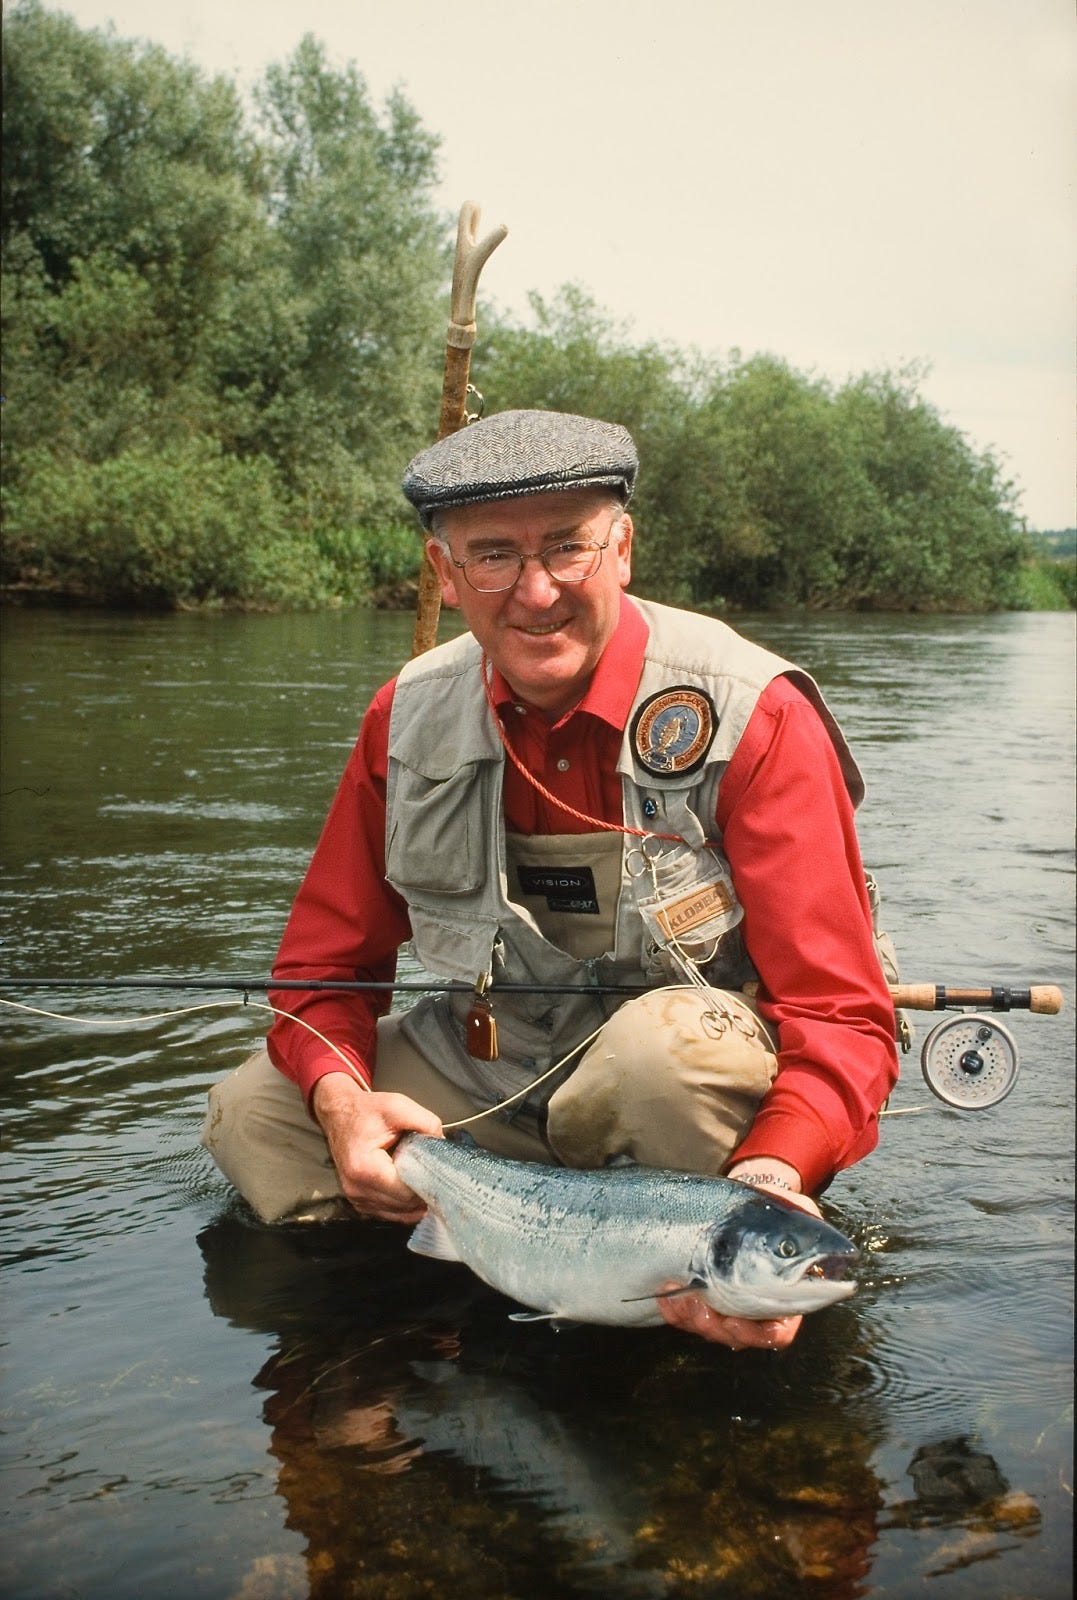 You have been responsible for bringing more anglers to Ireland